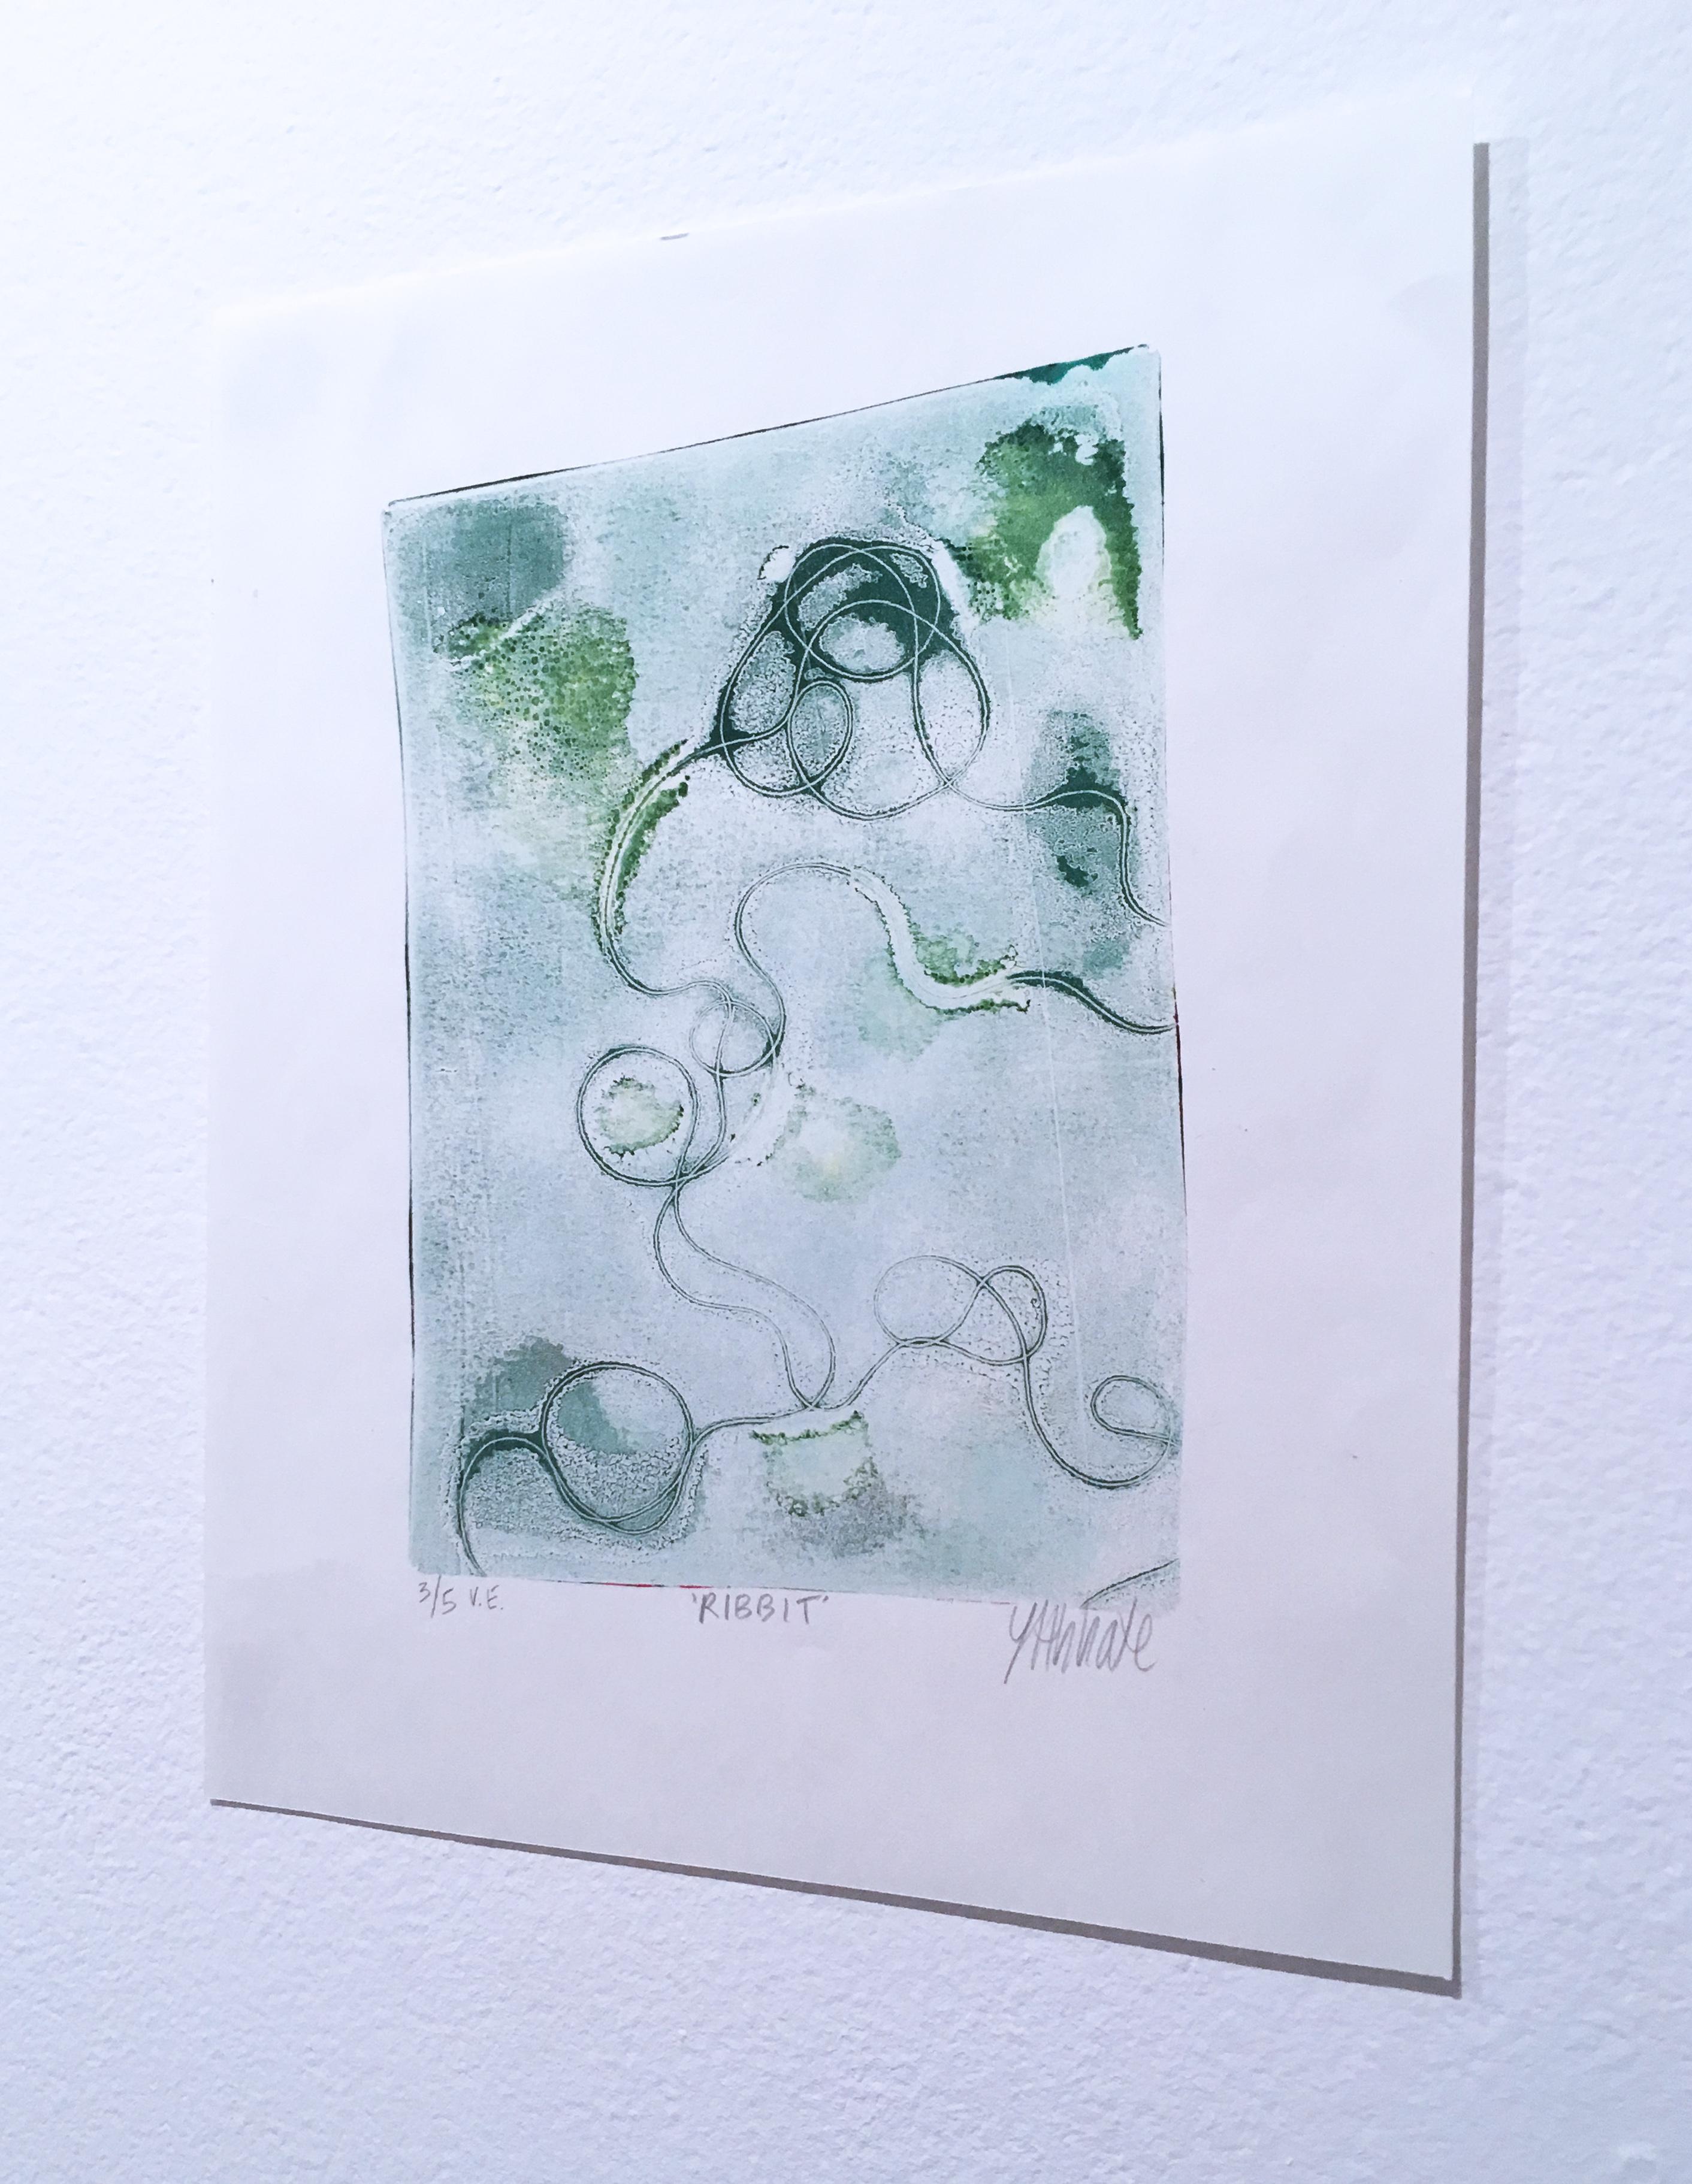 Monoprint on paper, green scale.  Unique.  Biomorphic abstraction.

Hand-signed by artist
Framing available

This work includes a certificate of authenticity upon request